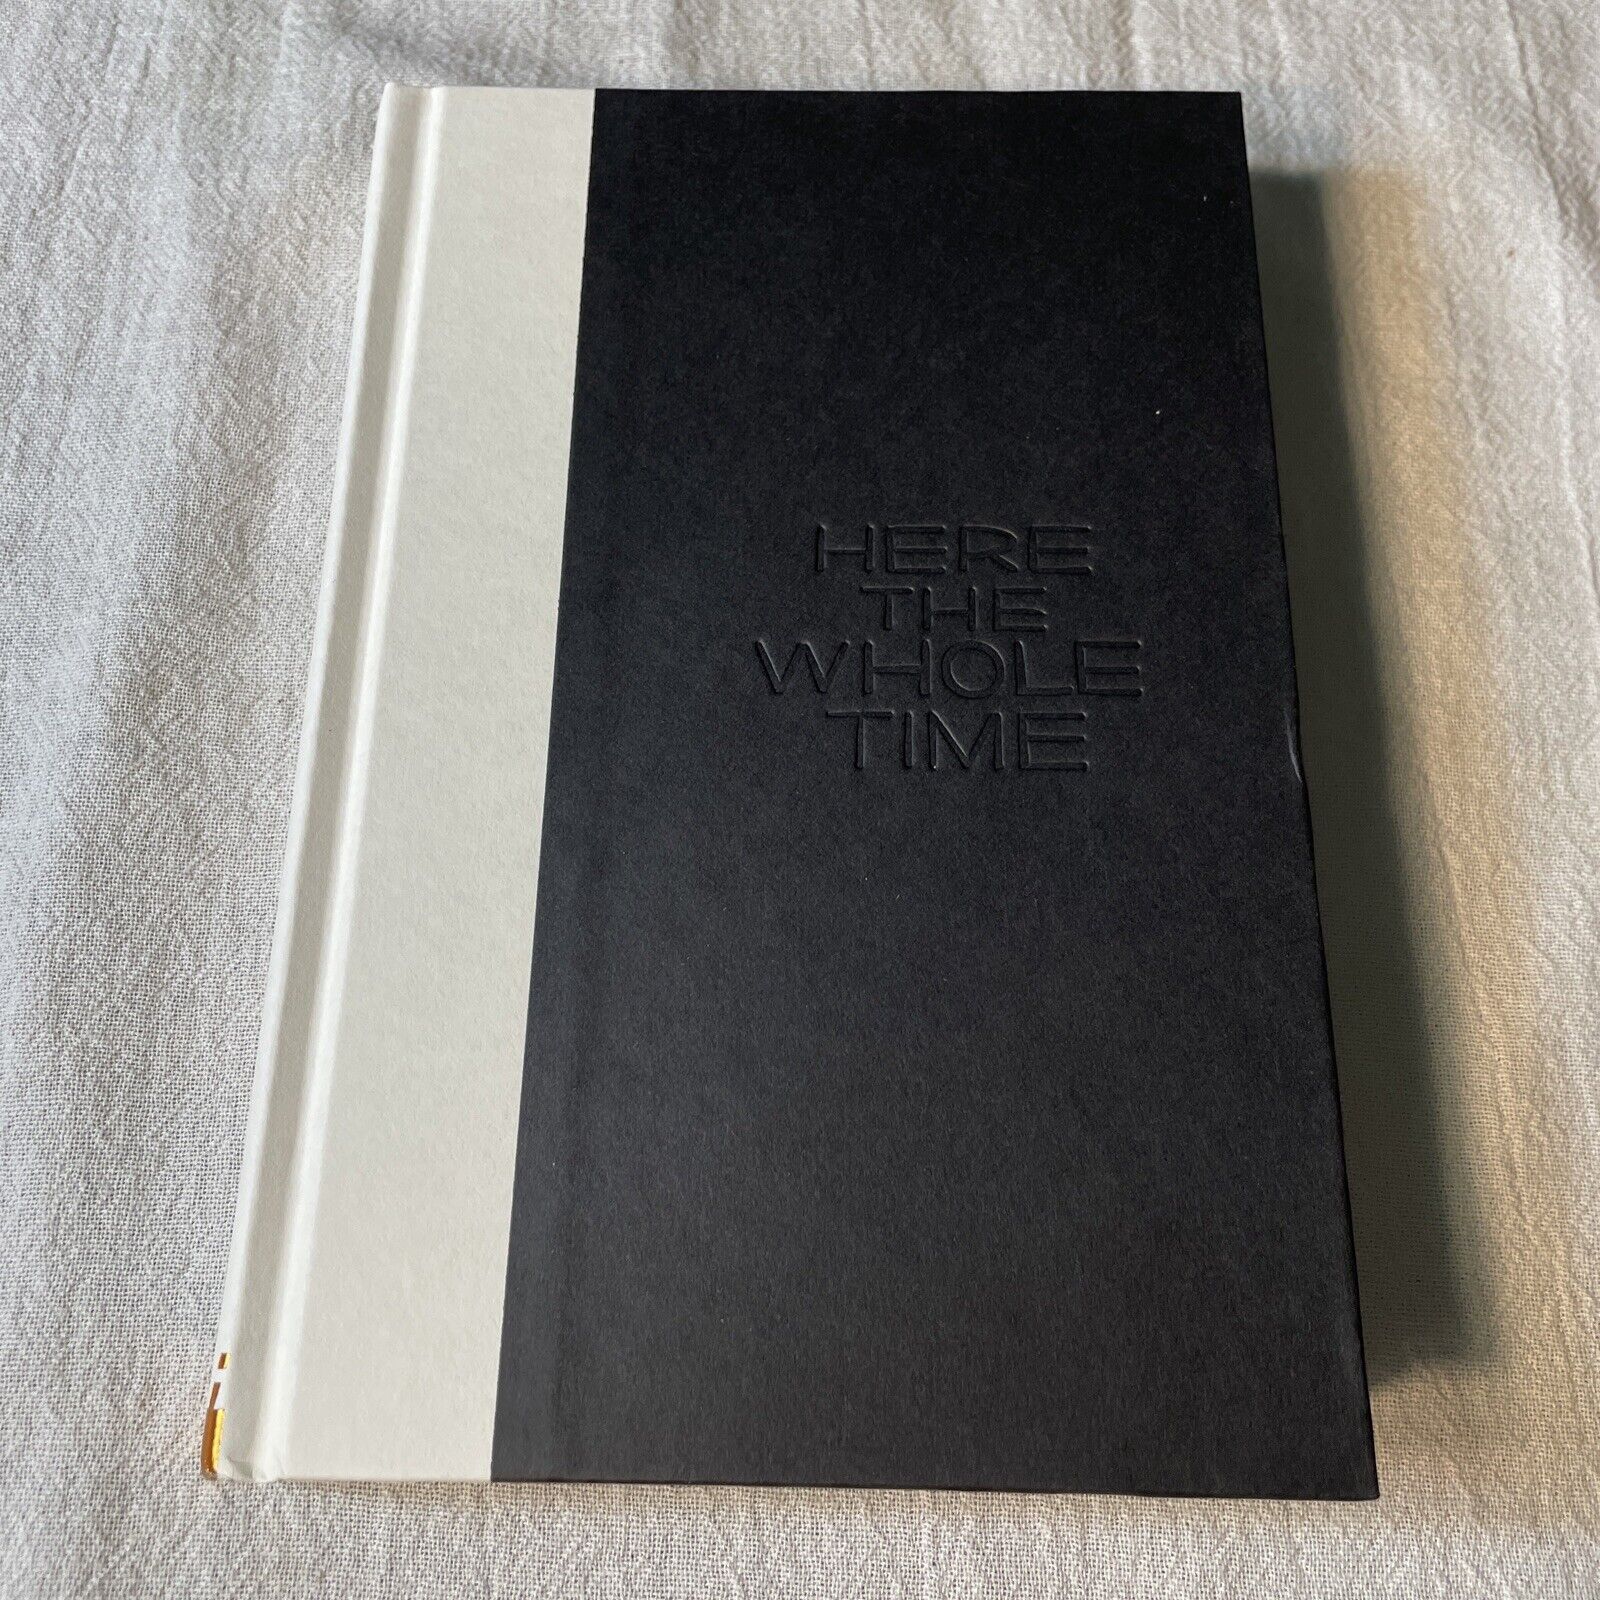 RARE SIGNED Victor Martins Here the Whole Time Book 1st First Edition HC DJ Mint Без бренда - фотография #10